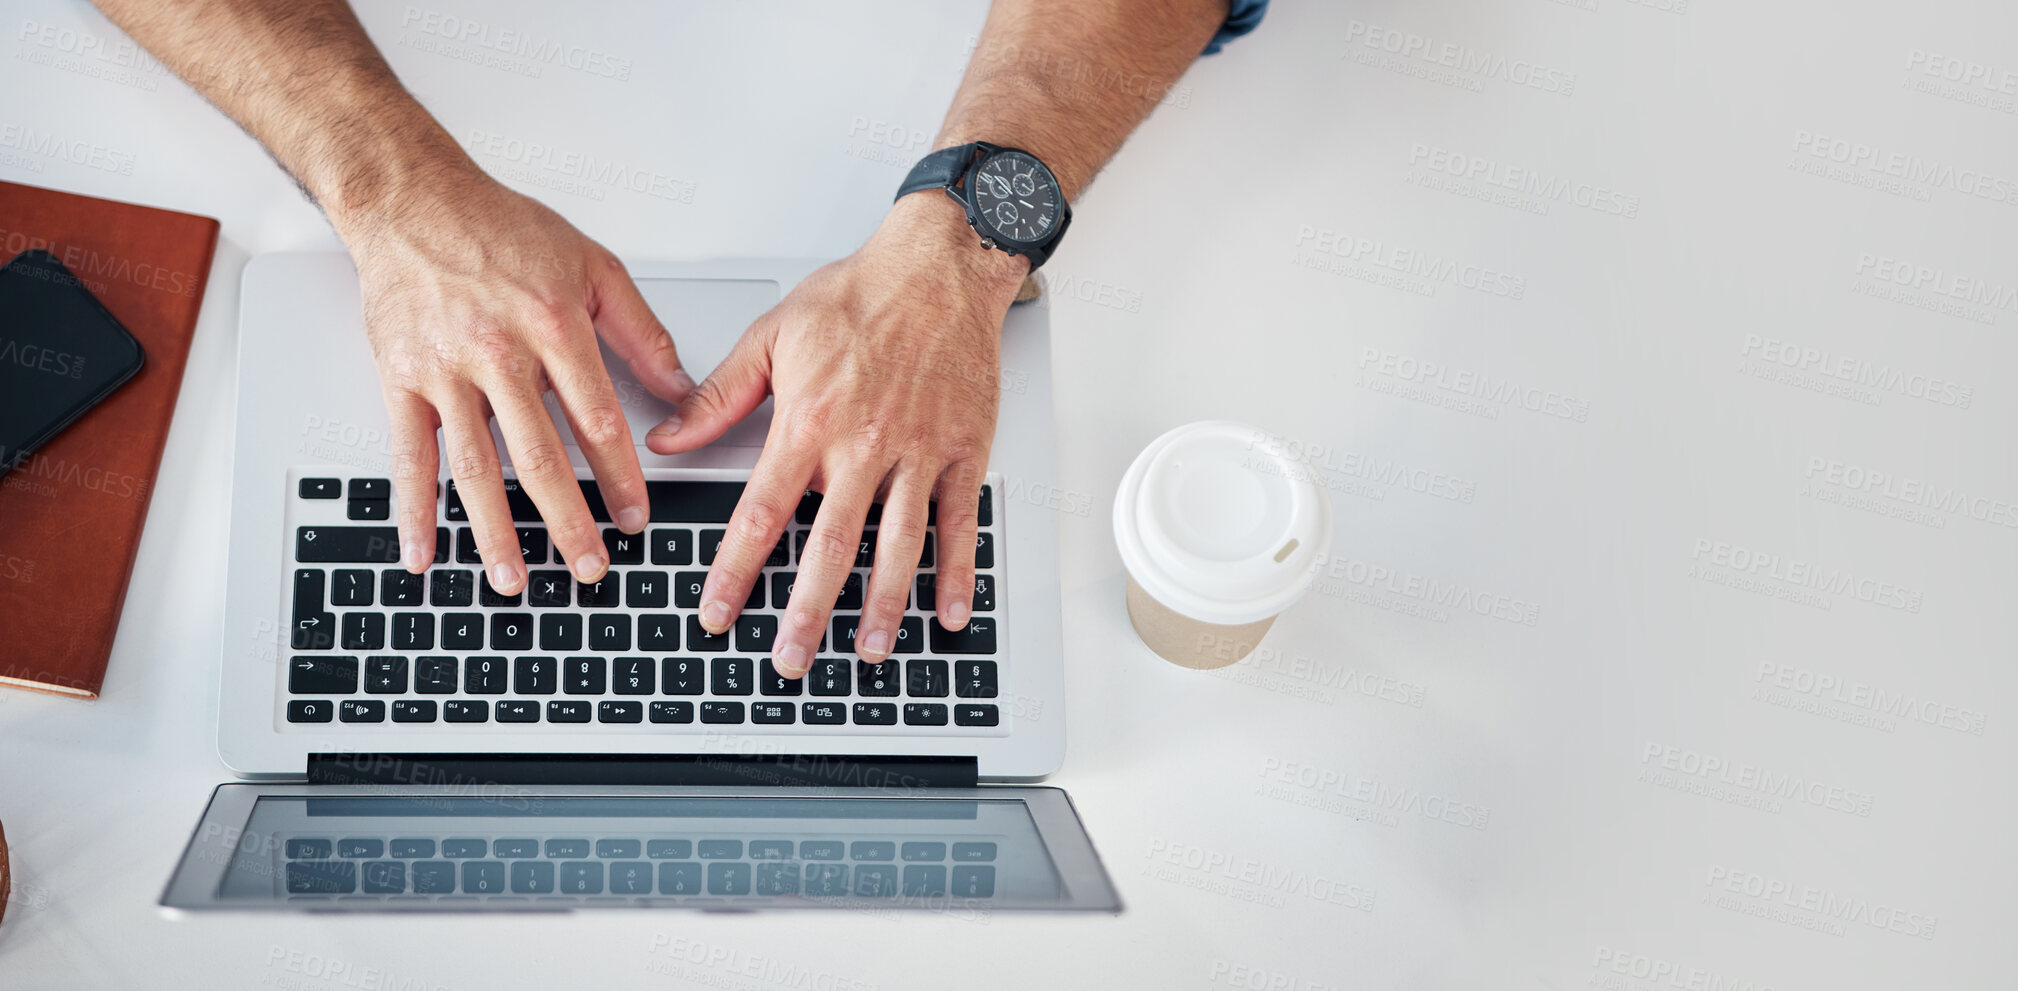 Buy stock photo Above, keyboard and laptop by hands of man typing, email or creative article at a desk. Top view, writer and male business influencer online for blog, financial and advice, freelance and remote work